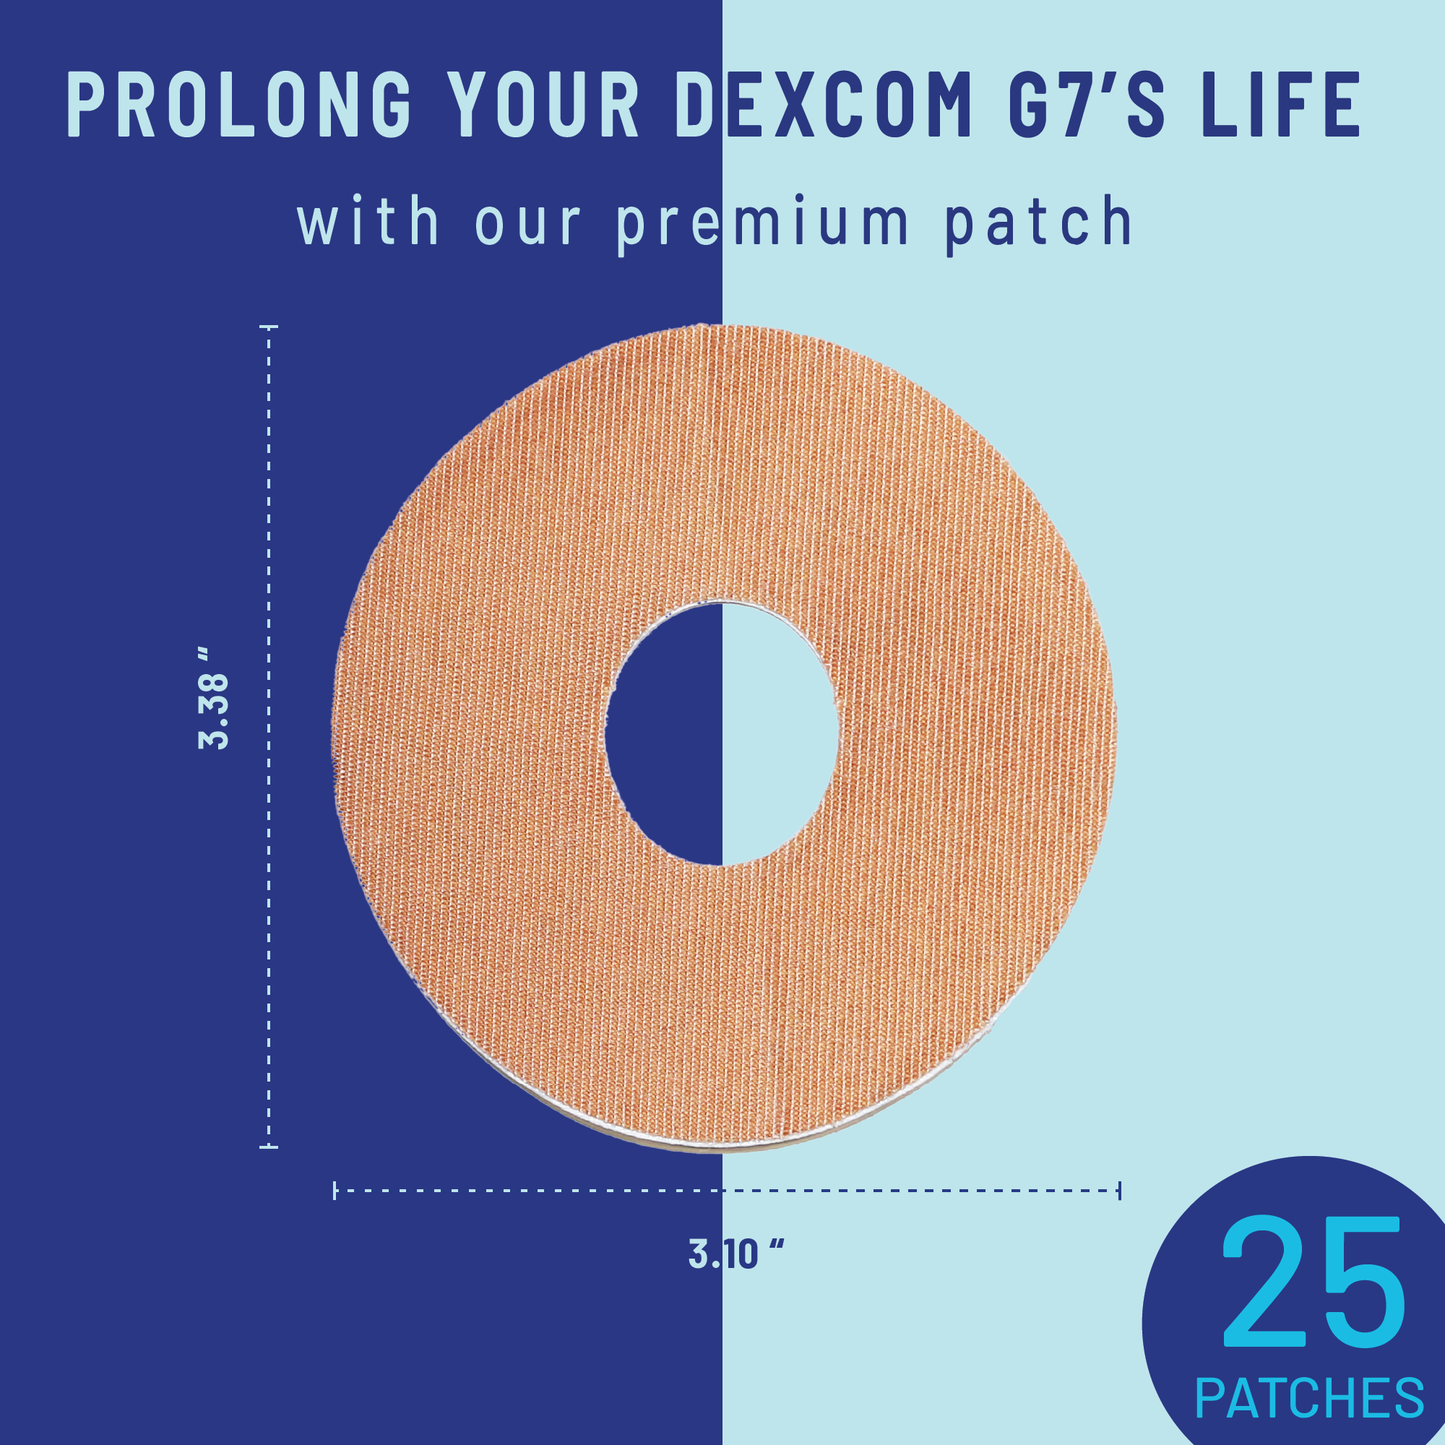 RightCare CGM Adhesive Patch made with KT Tape, Dexcom G7, Bag of 25